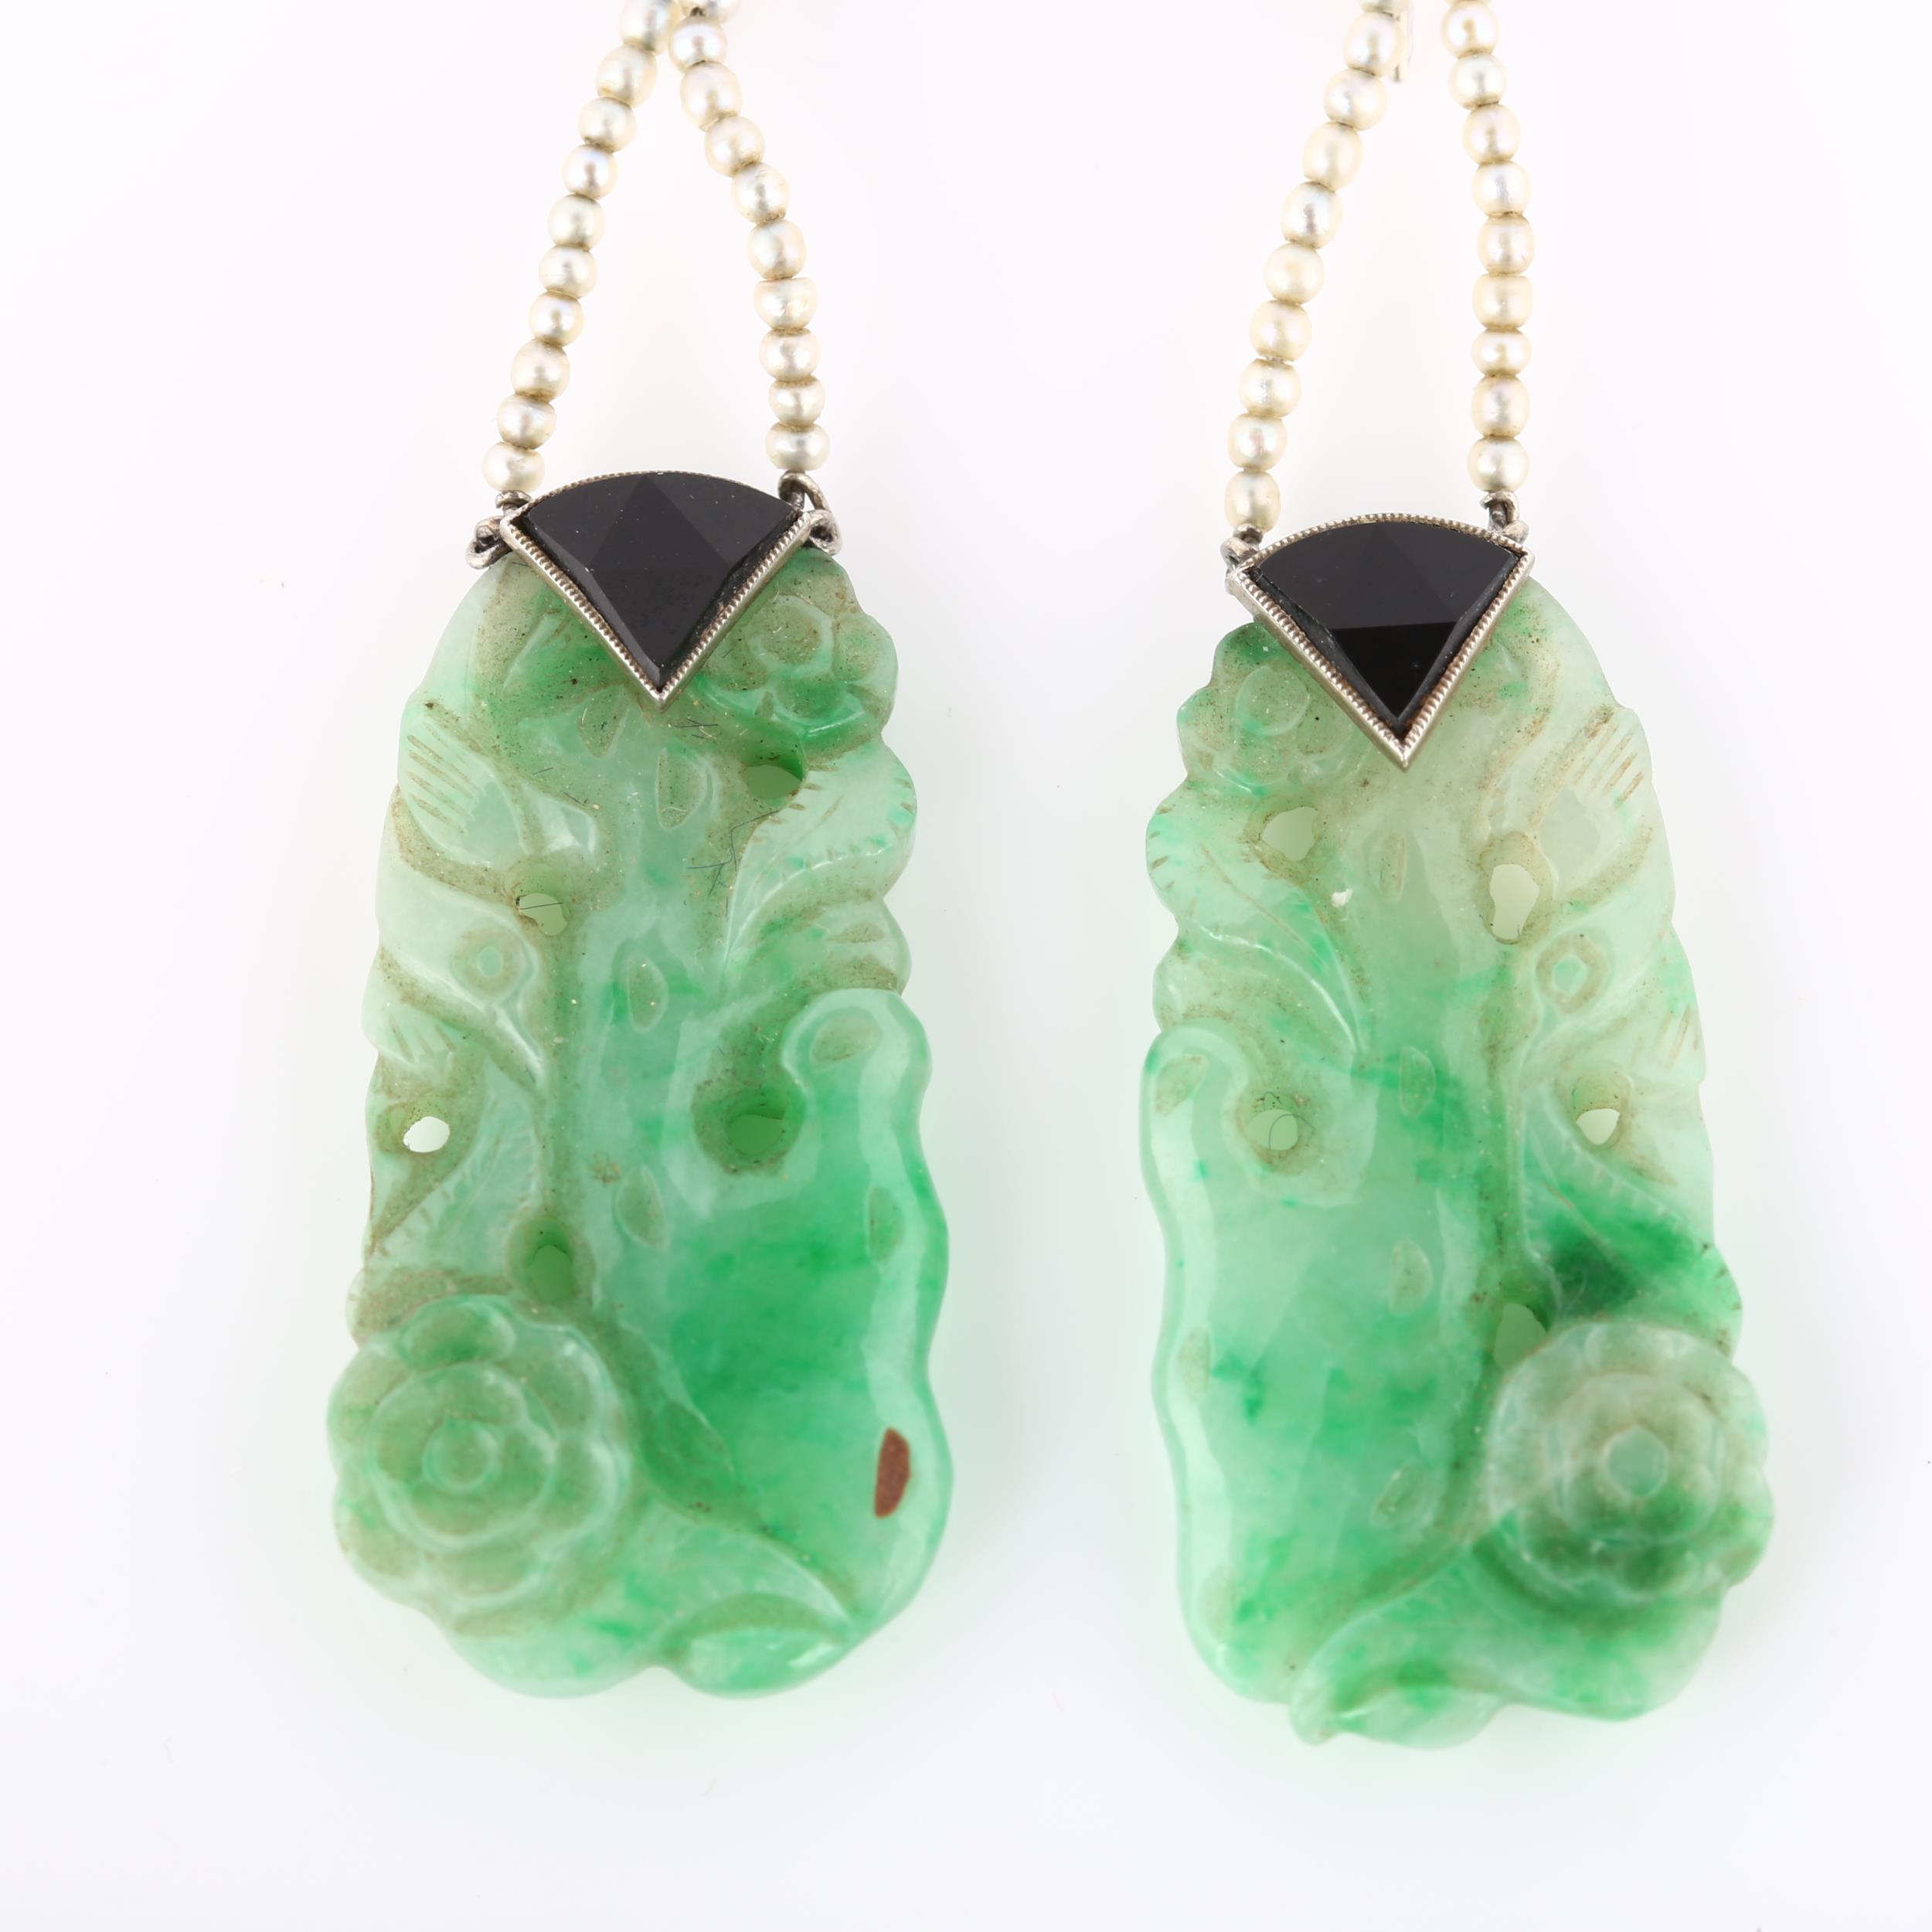 A pair of Art Deco jade onyx and seed pearl drop earrings, with carved and polished jade panels - Image 2 of 4